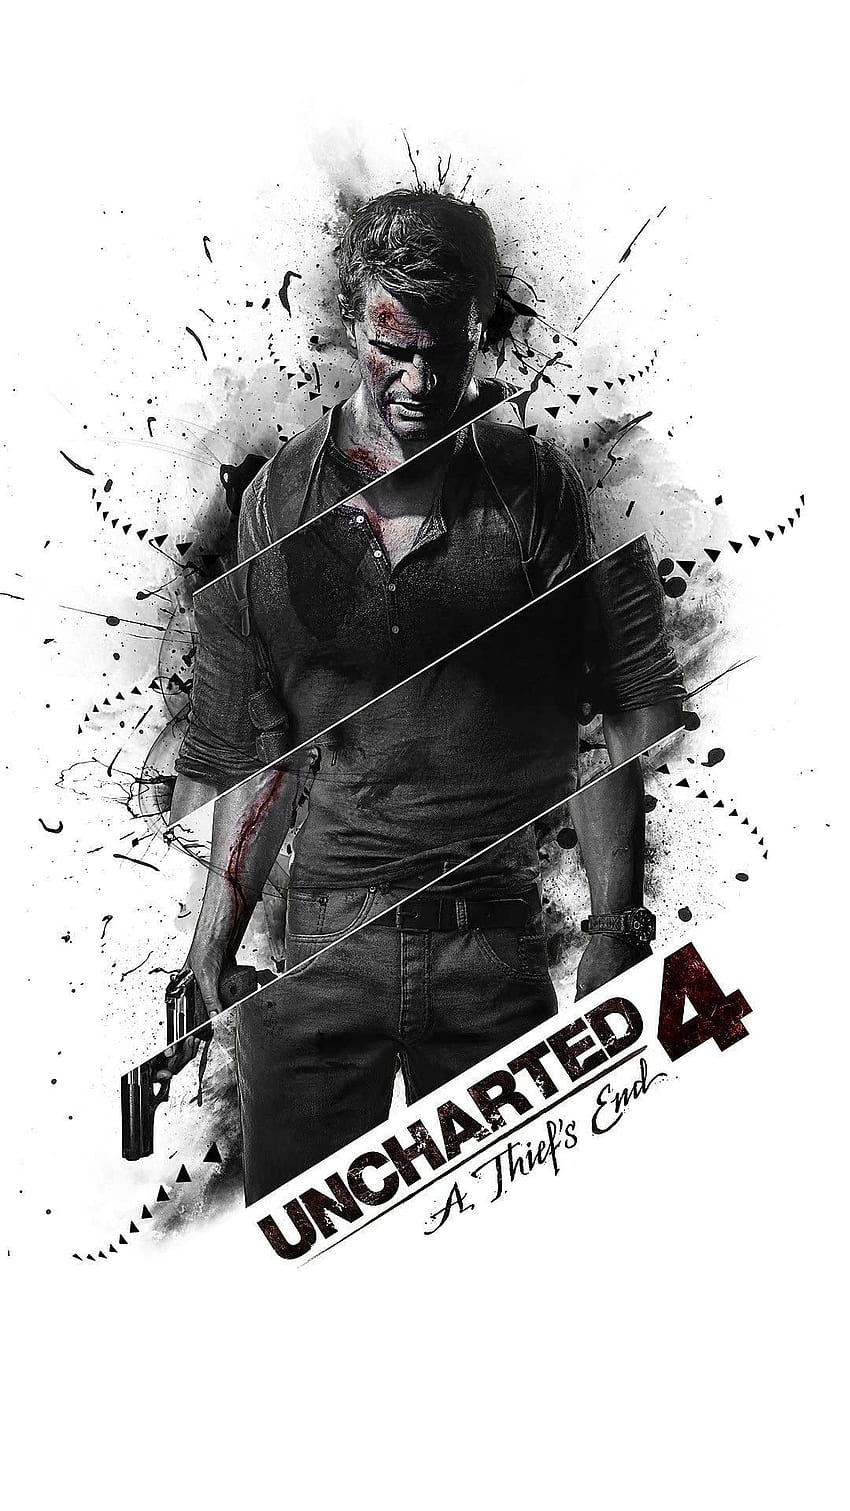 Uncharted 4 Hupages iPhone . Uncharted, Uncharted drake, Uncharted game HD phone wallpaper